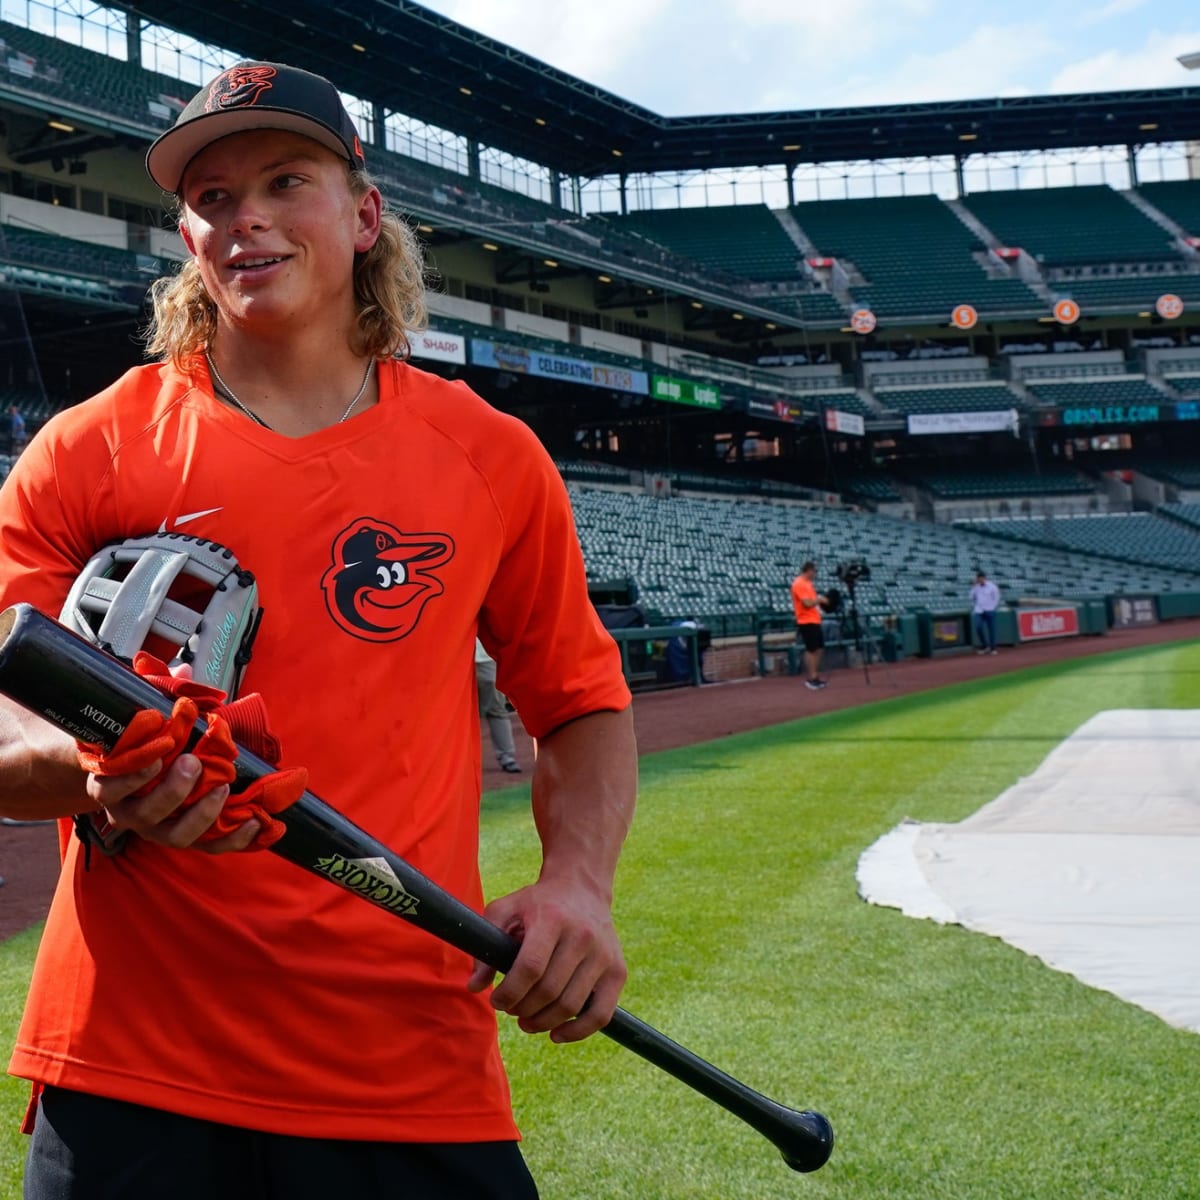 Baltimore Orioles: Orioles Draft Jackson Holliday First Overall